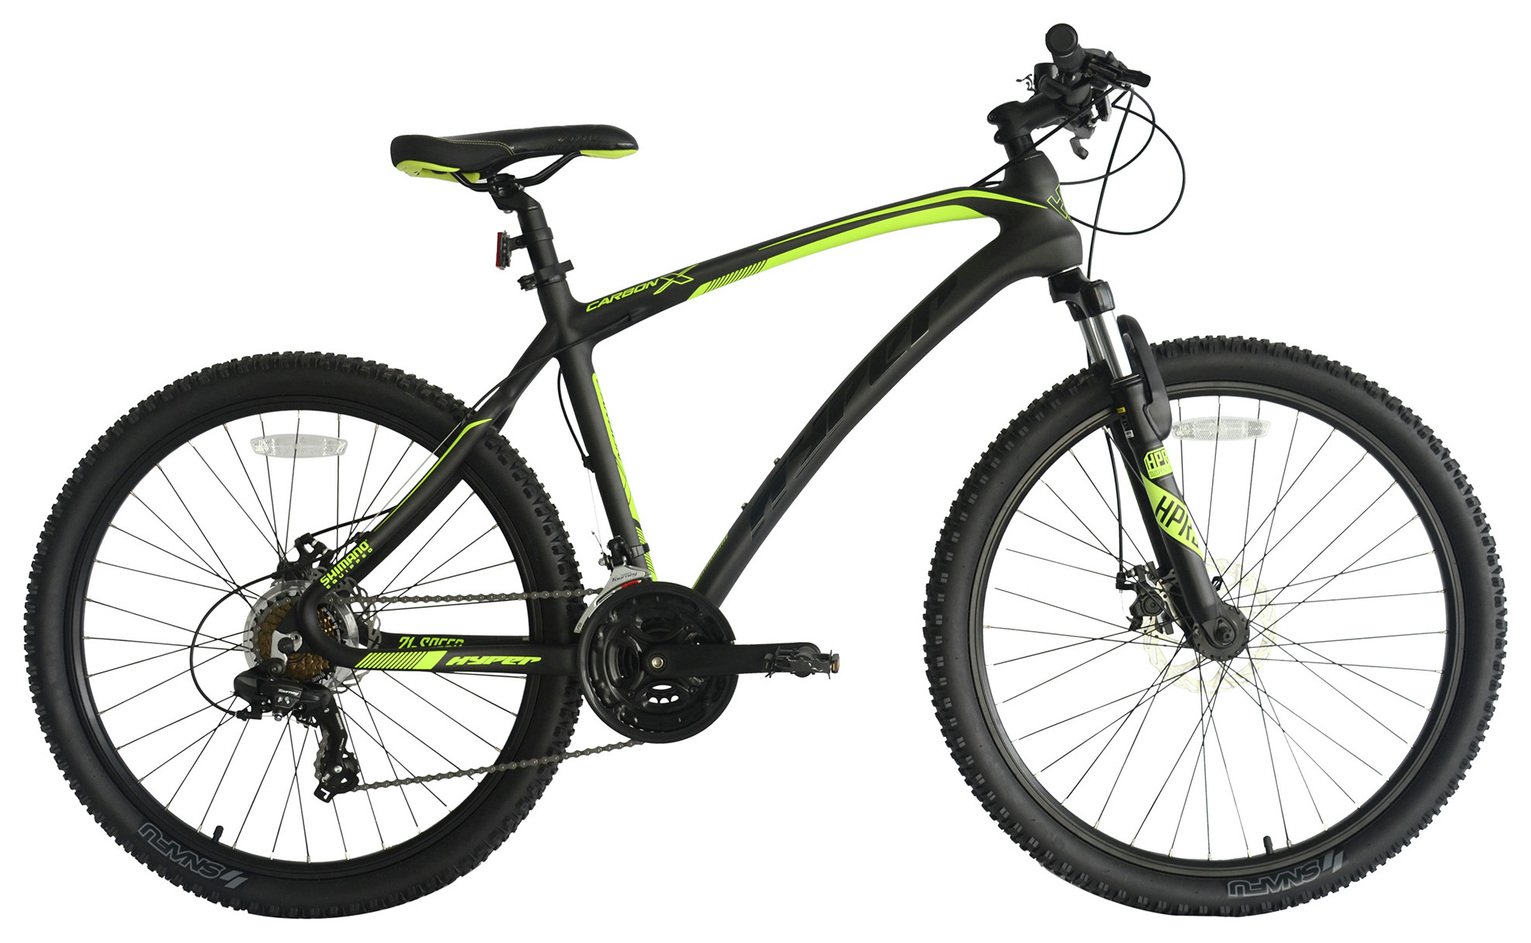 Hyper Full Carbon 26 Inch Front Suspension Mountain Bike